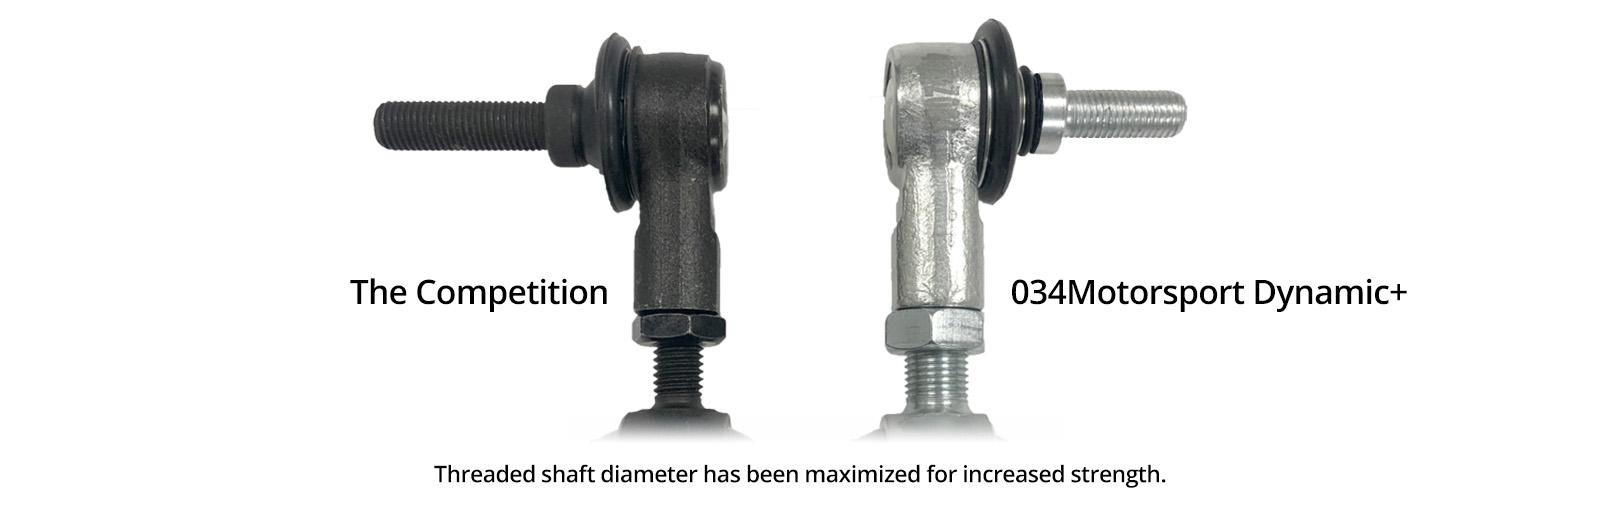 Maximized threaded shaft diameter increases overall strength of the end link.